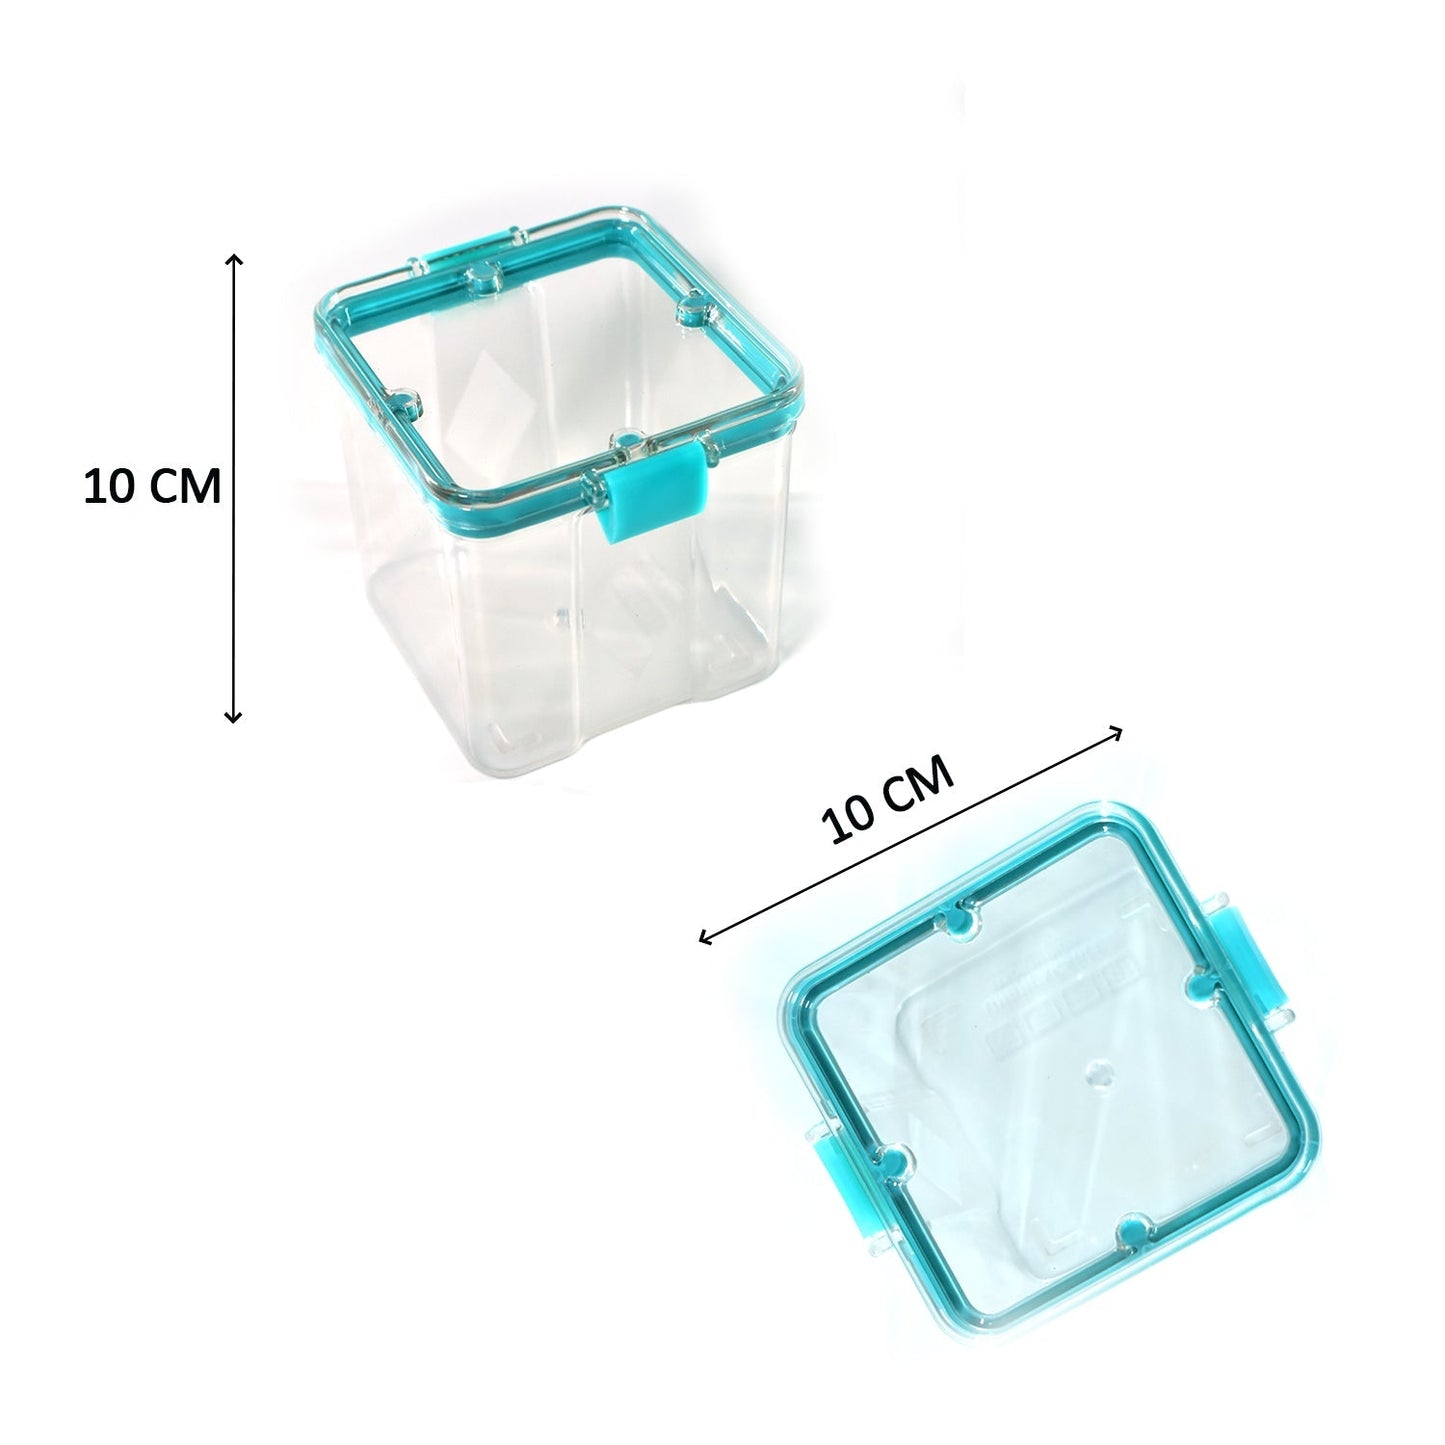 4 Pc Square Container 700 Ml Used For Storing Types Of Food Stuffs And Items.